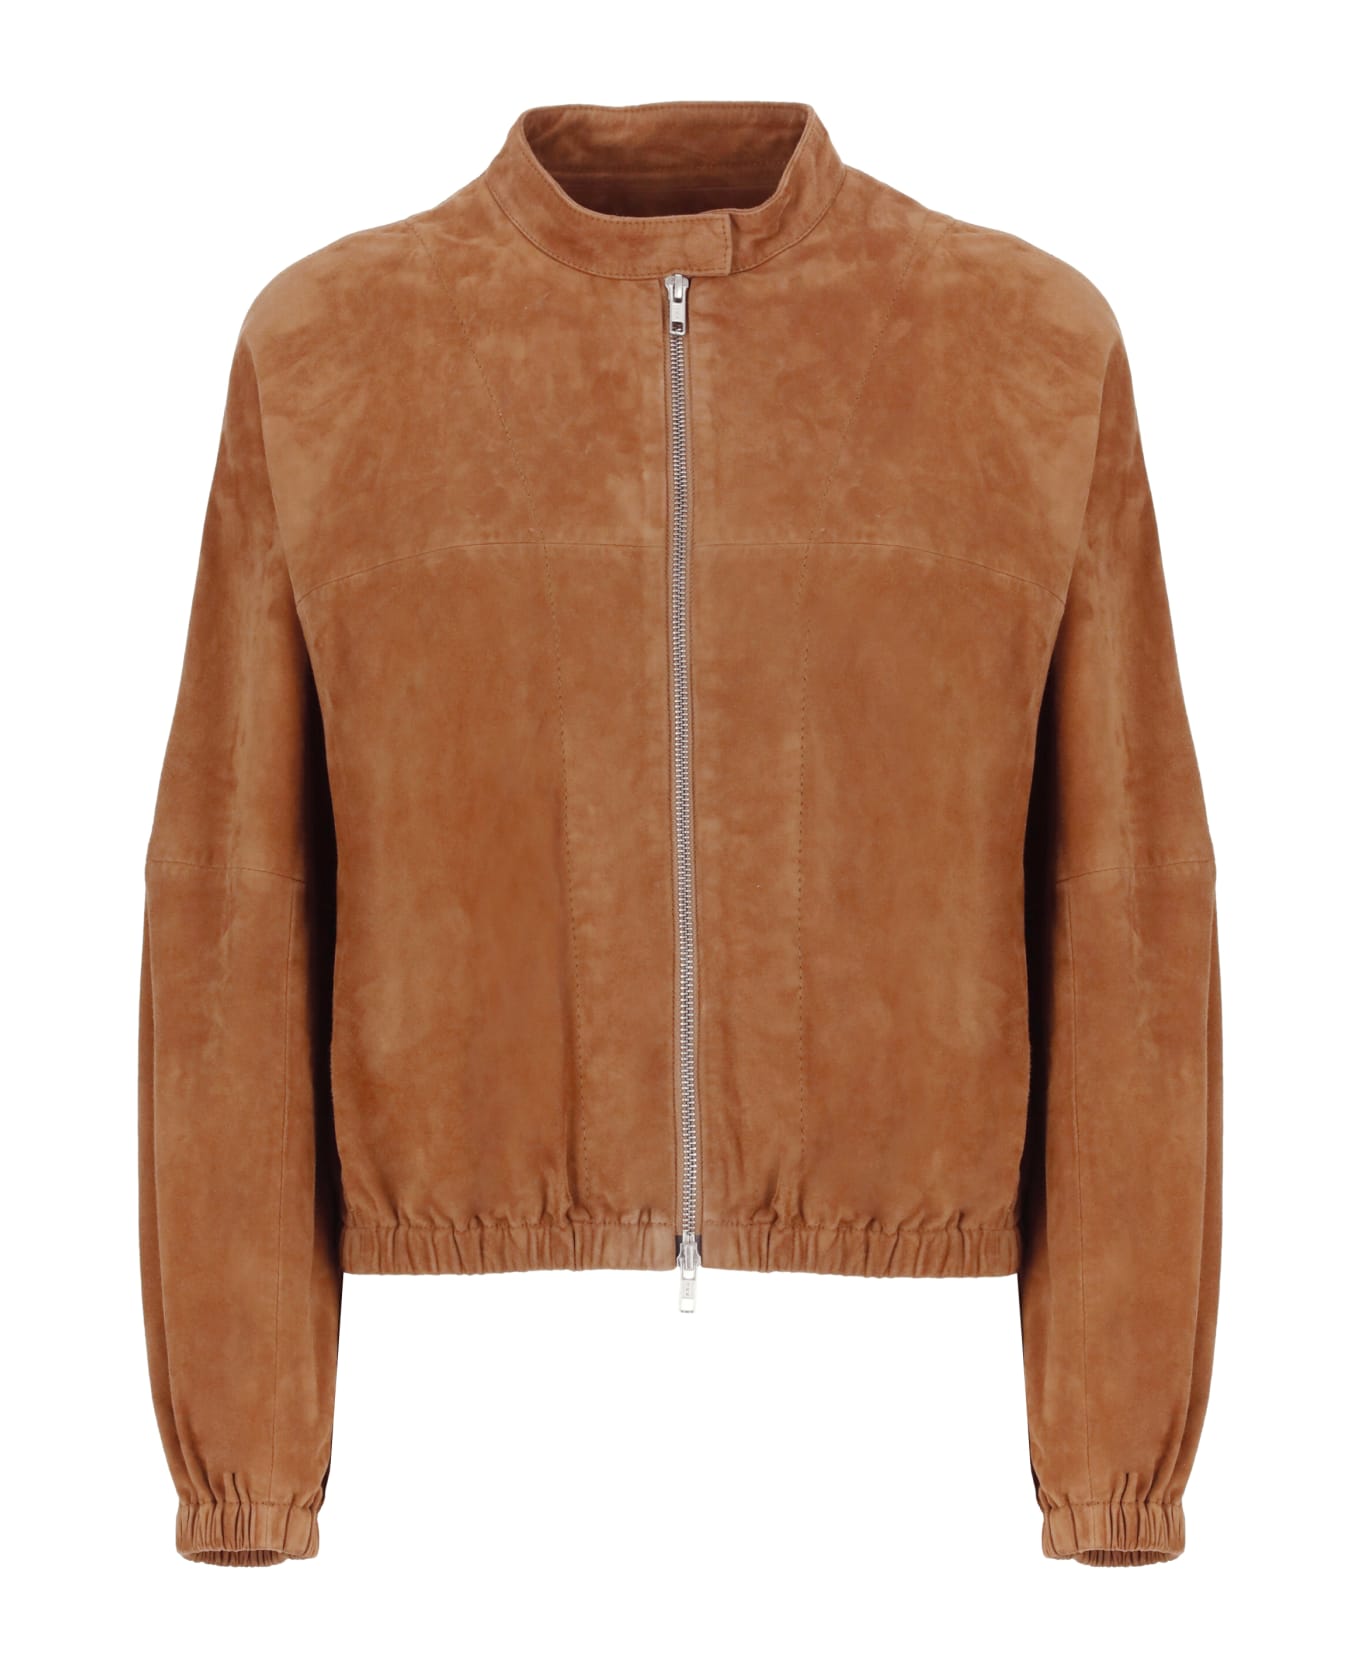 Bully Suede Leather Bomber Jacket - Brown レザージャケット